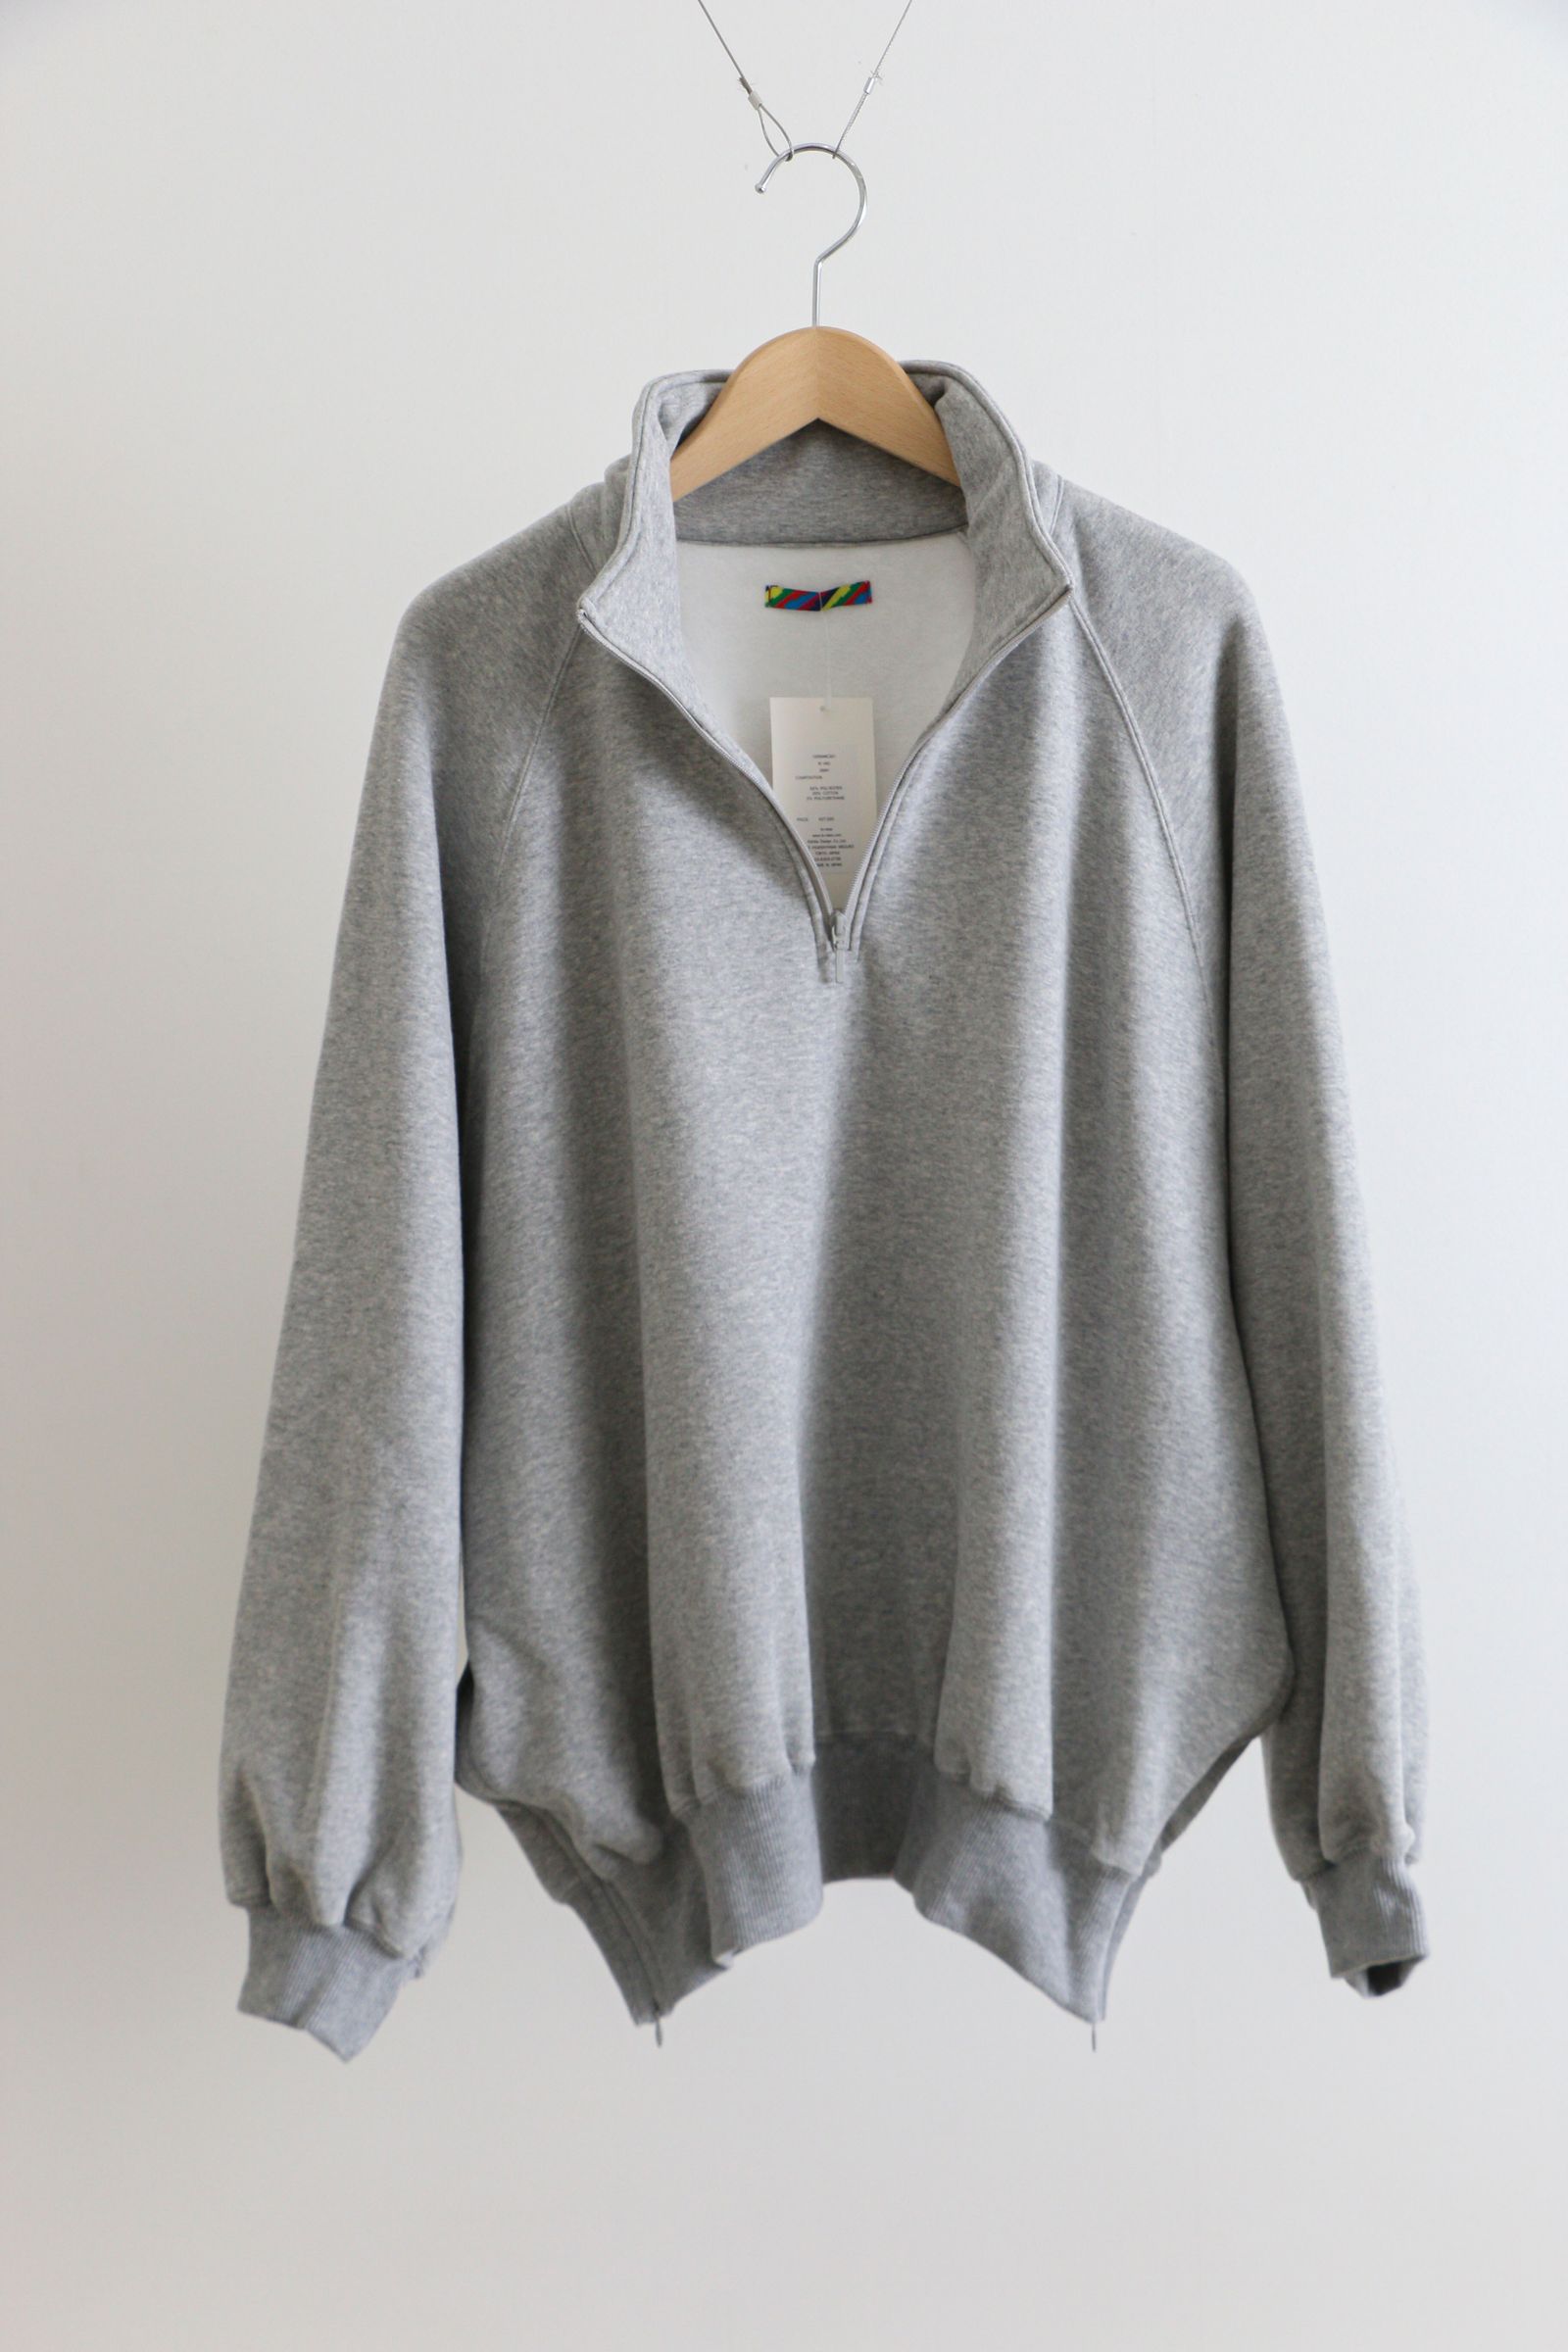 is-ness - RELAX PULLOVER HALF ZIP SWEAT SHIRTS GRAY